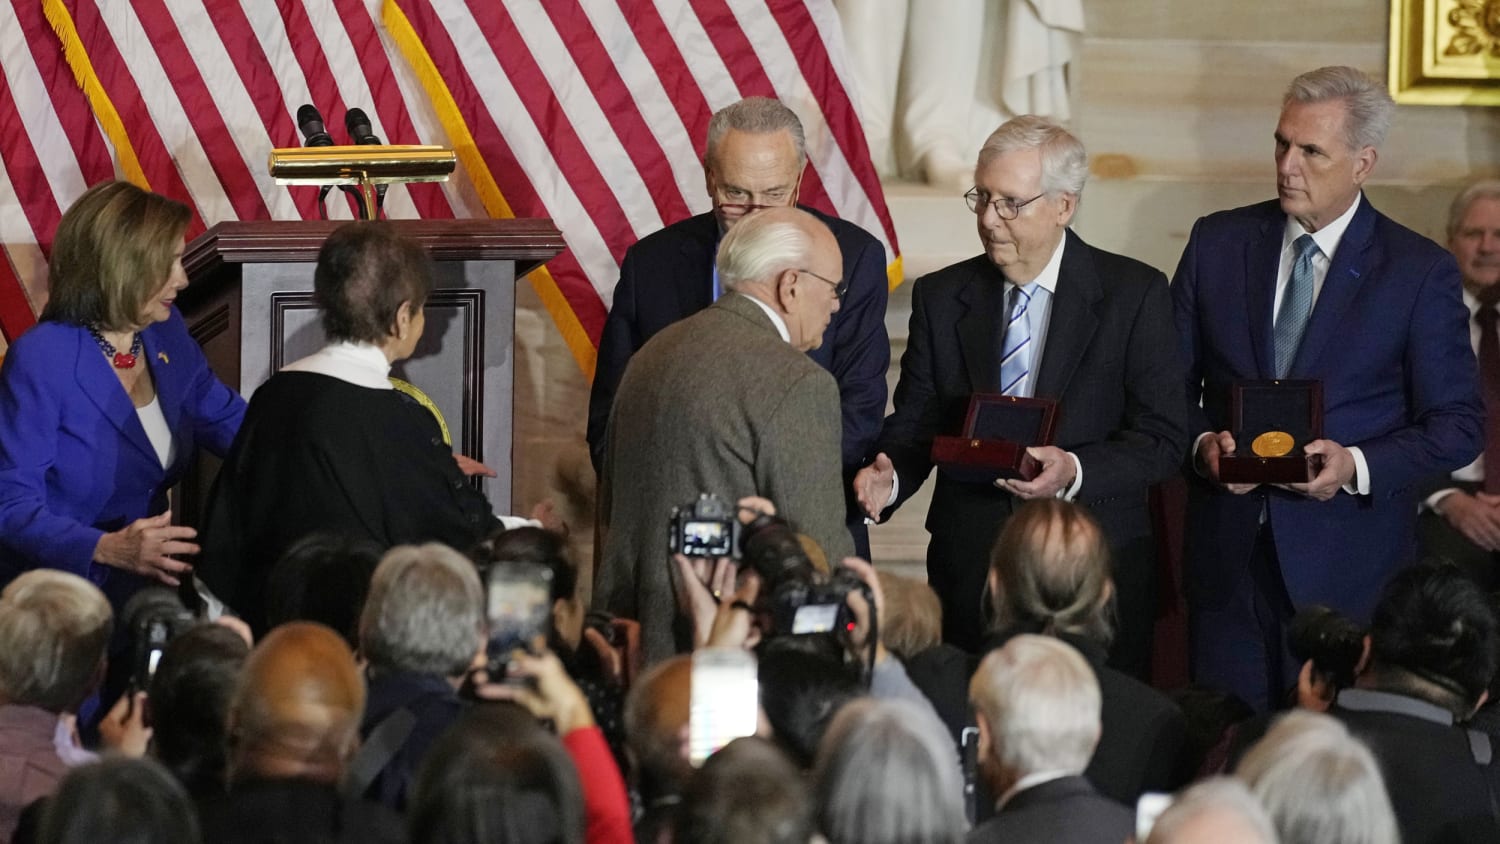 The dramatic and unscripted moment we needed at the Congressional Gold Medal ceremony